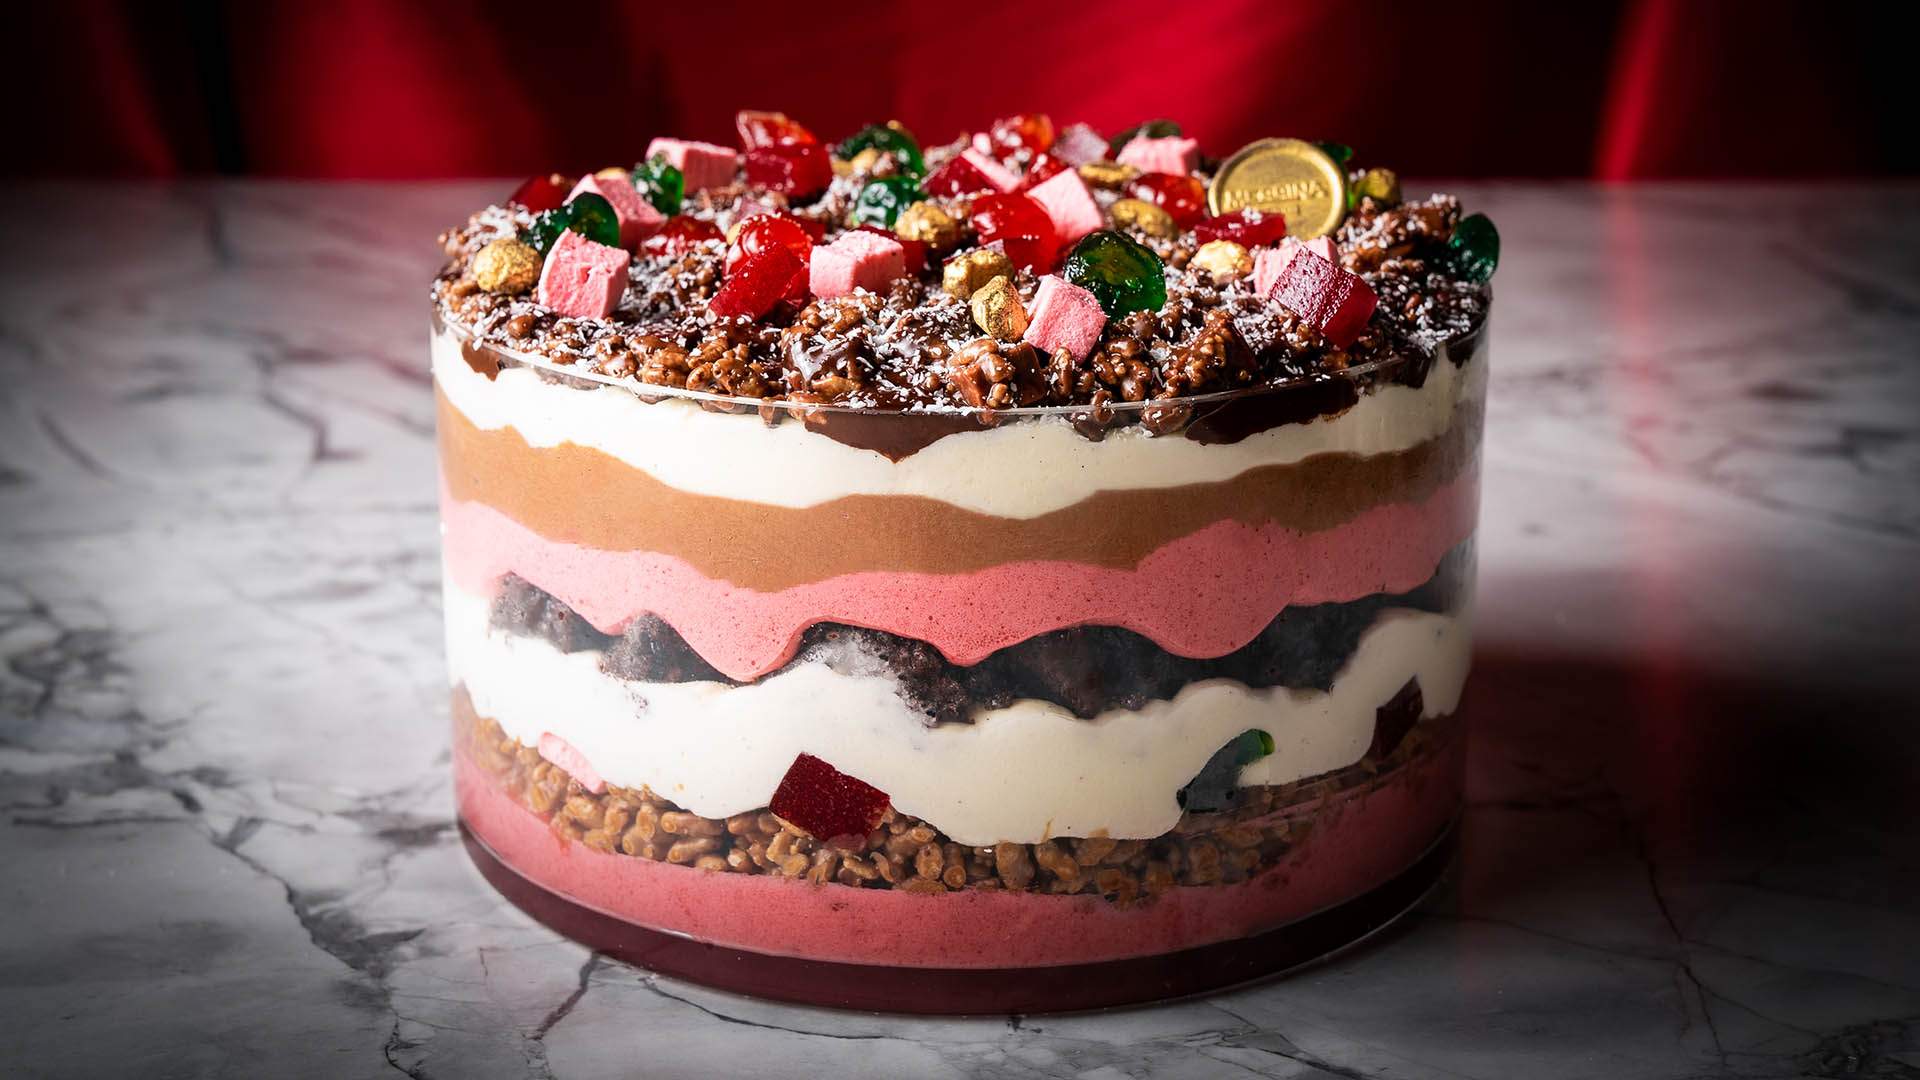 Messina Is Releasing a Gelato Rocky Road Trifle to Take Your Christmas Lunch to the Next Level